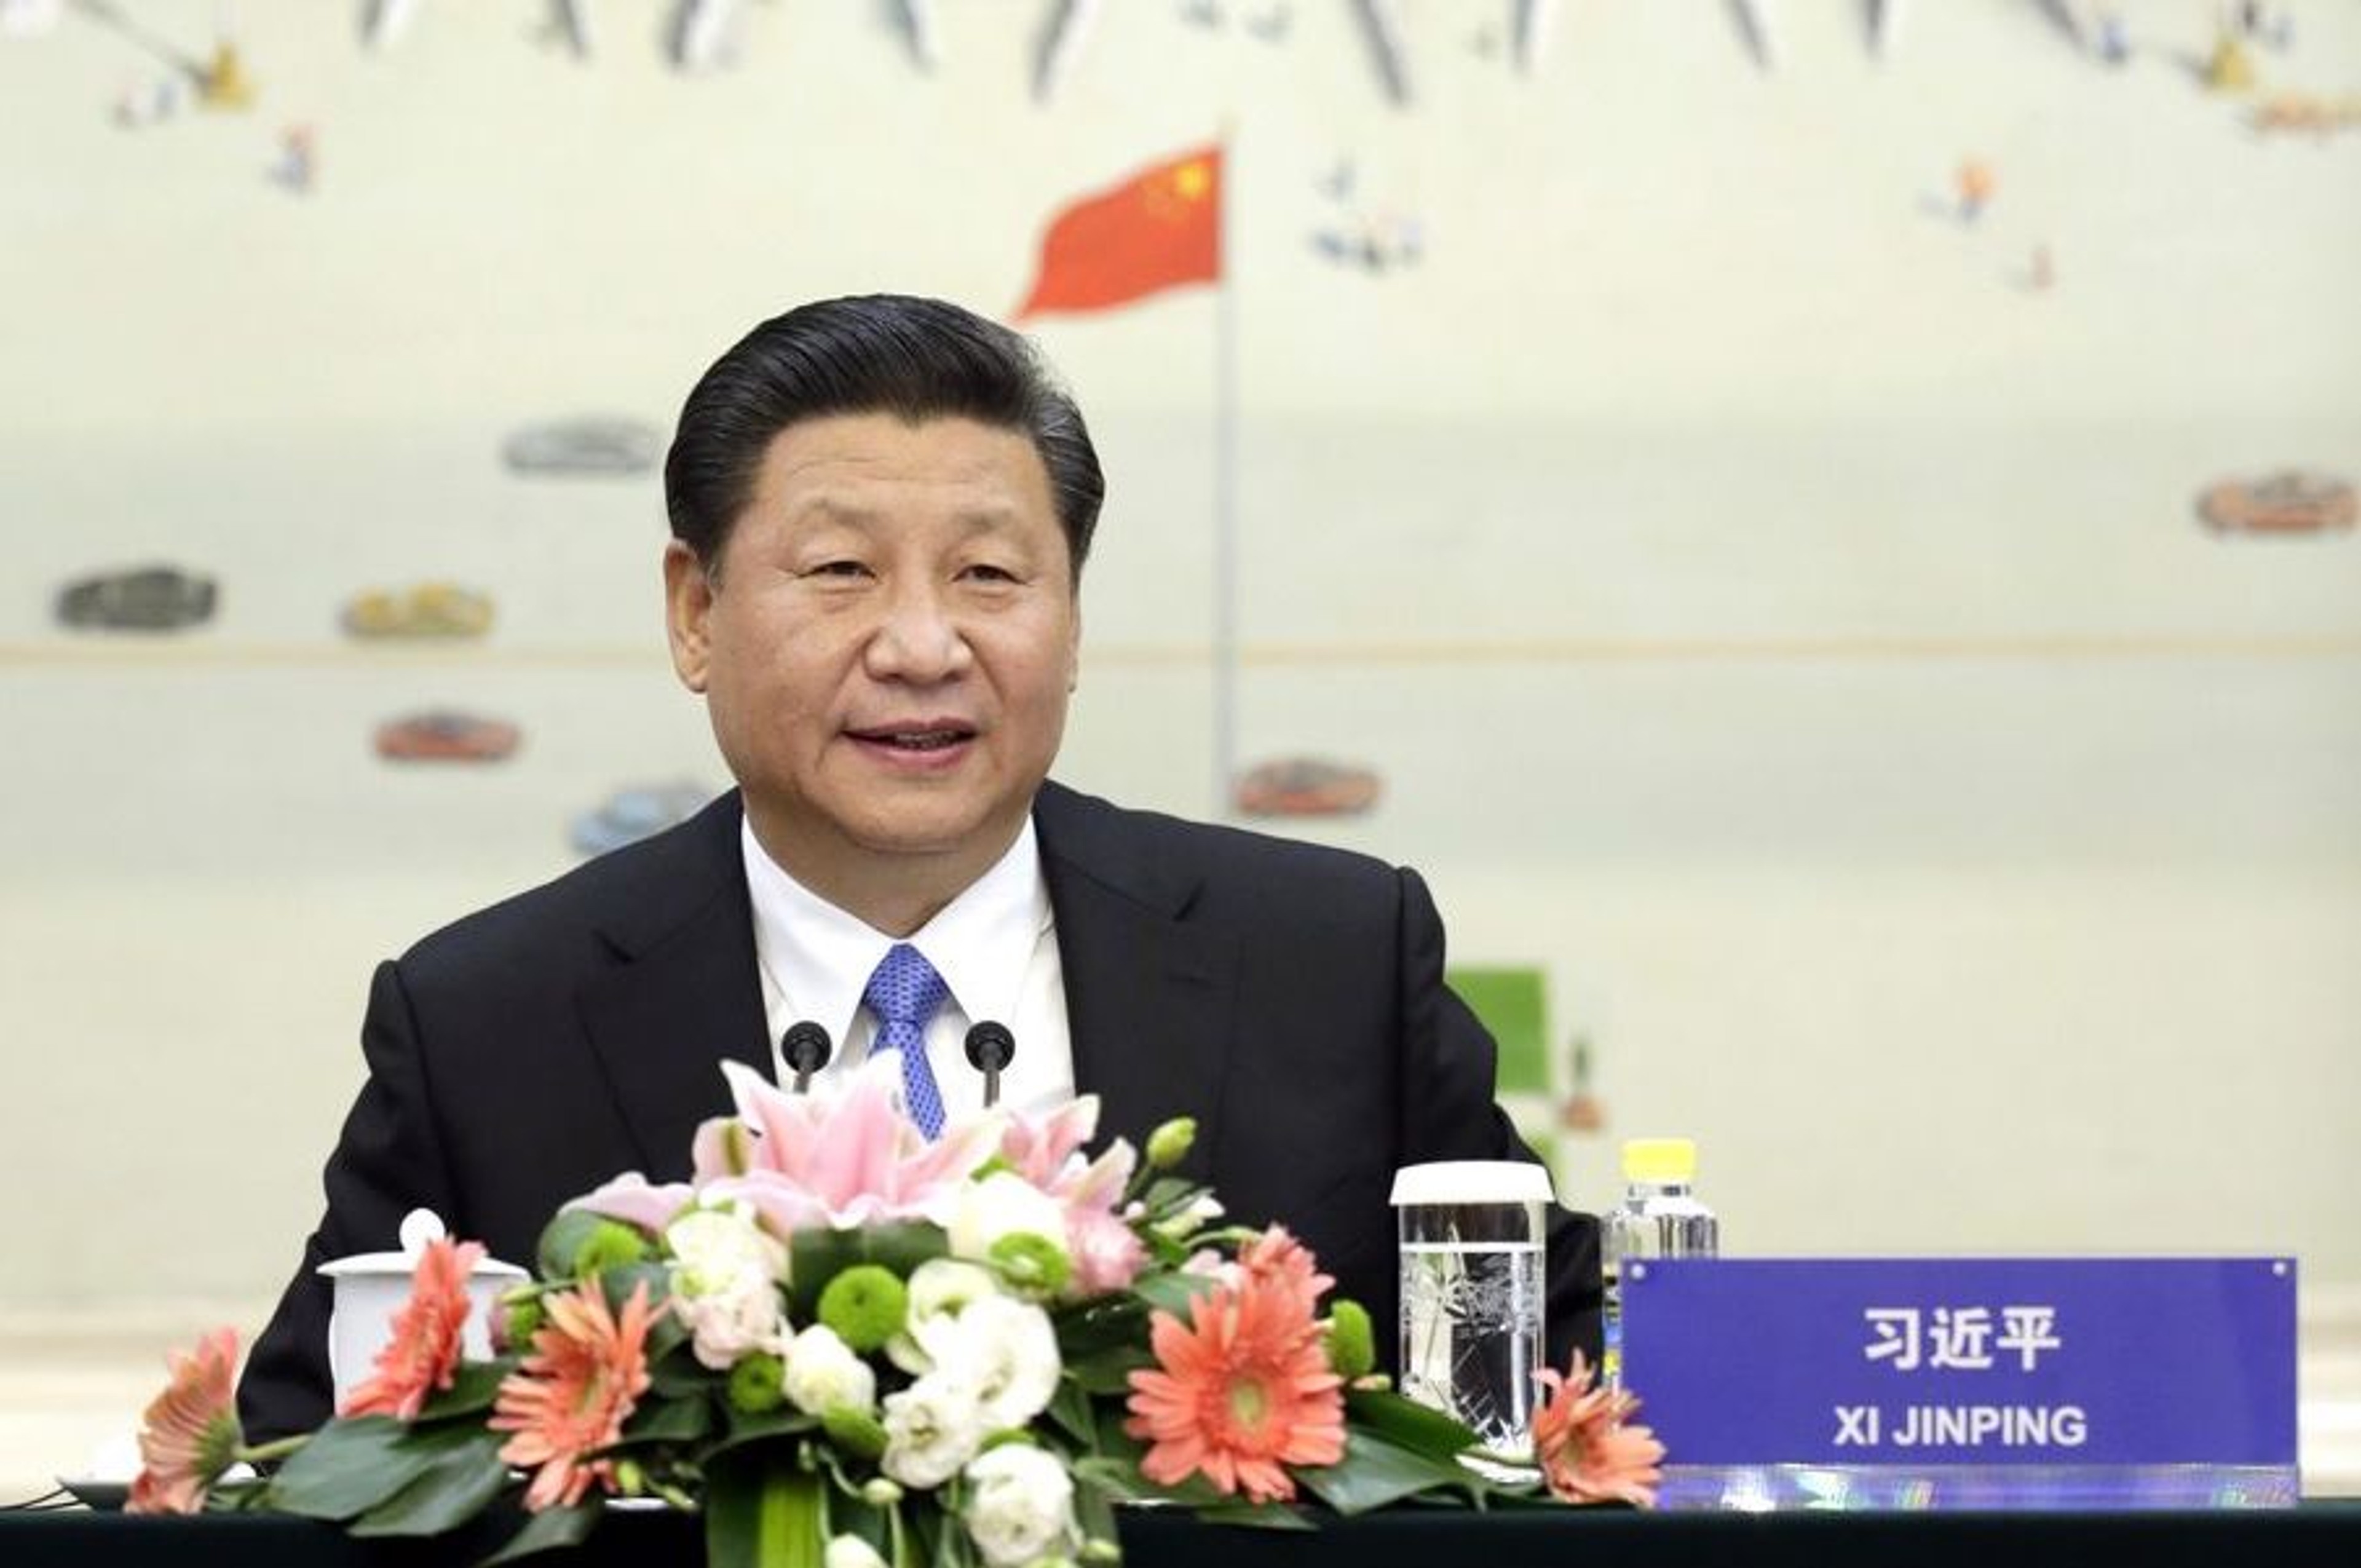 Xi Jinping at 2nd "Understanding China" Conference 